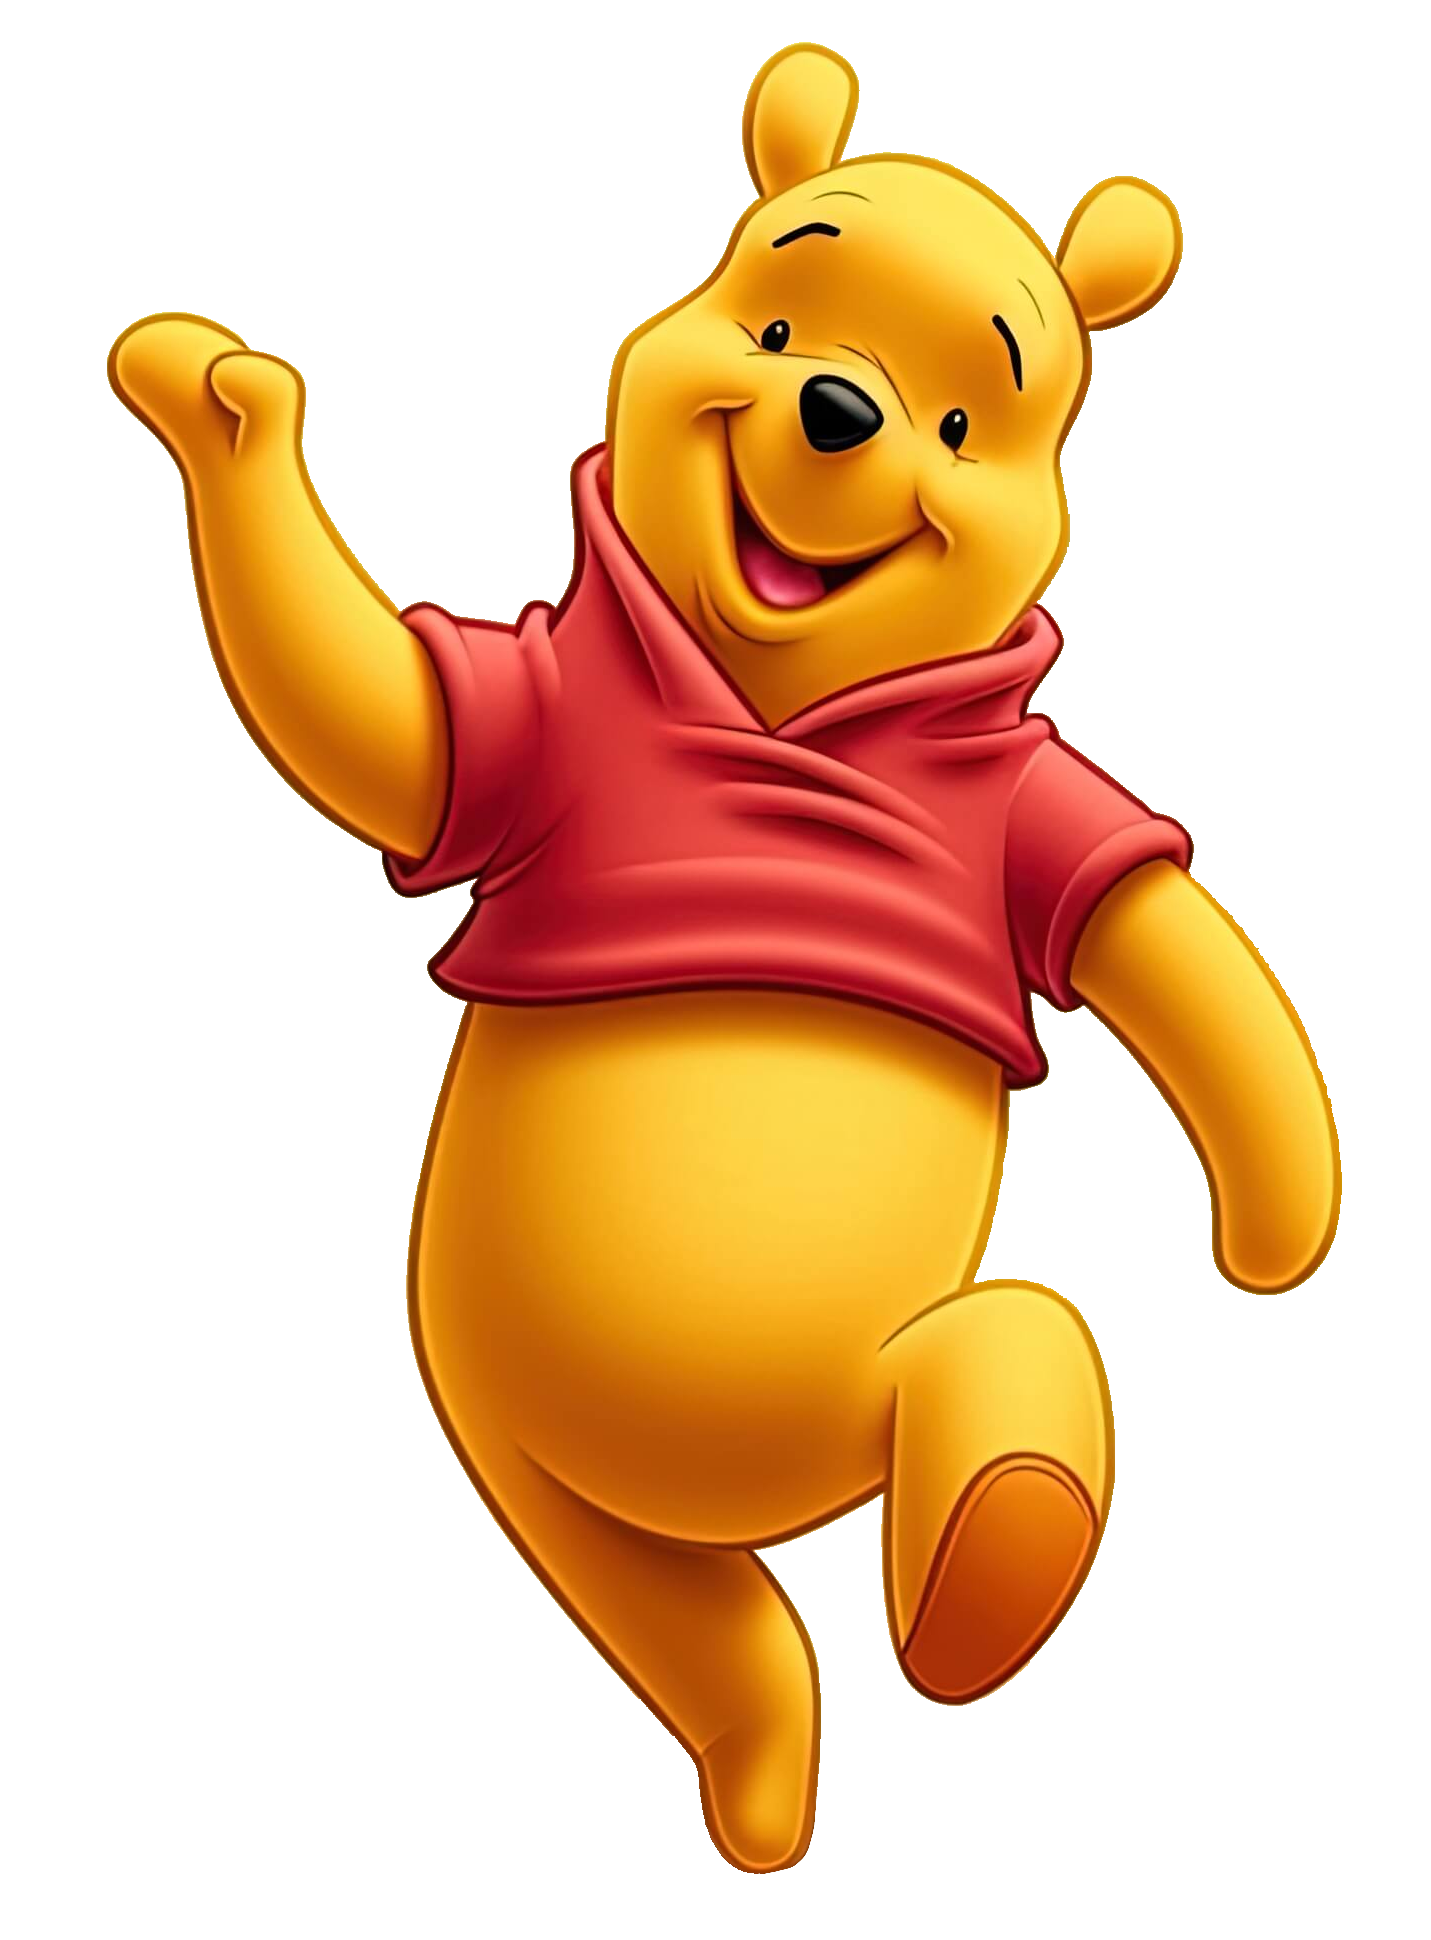 Winnie the Pooh PNG Images free Download - Pngfre